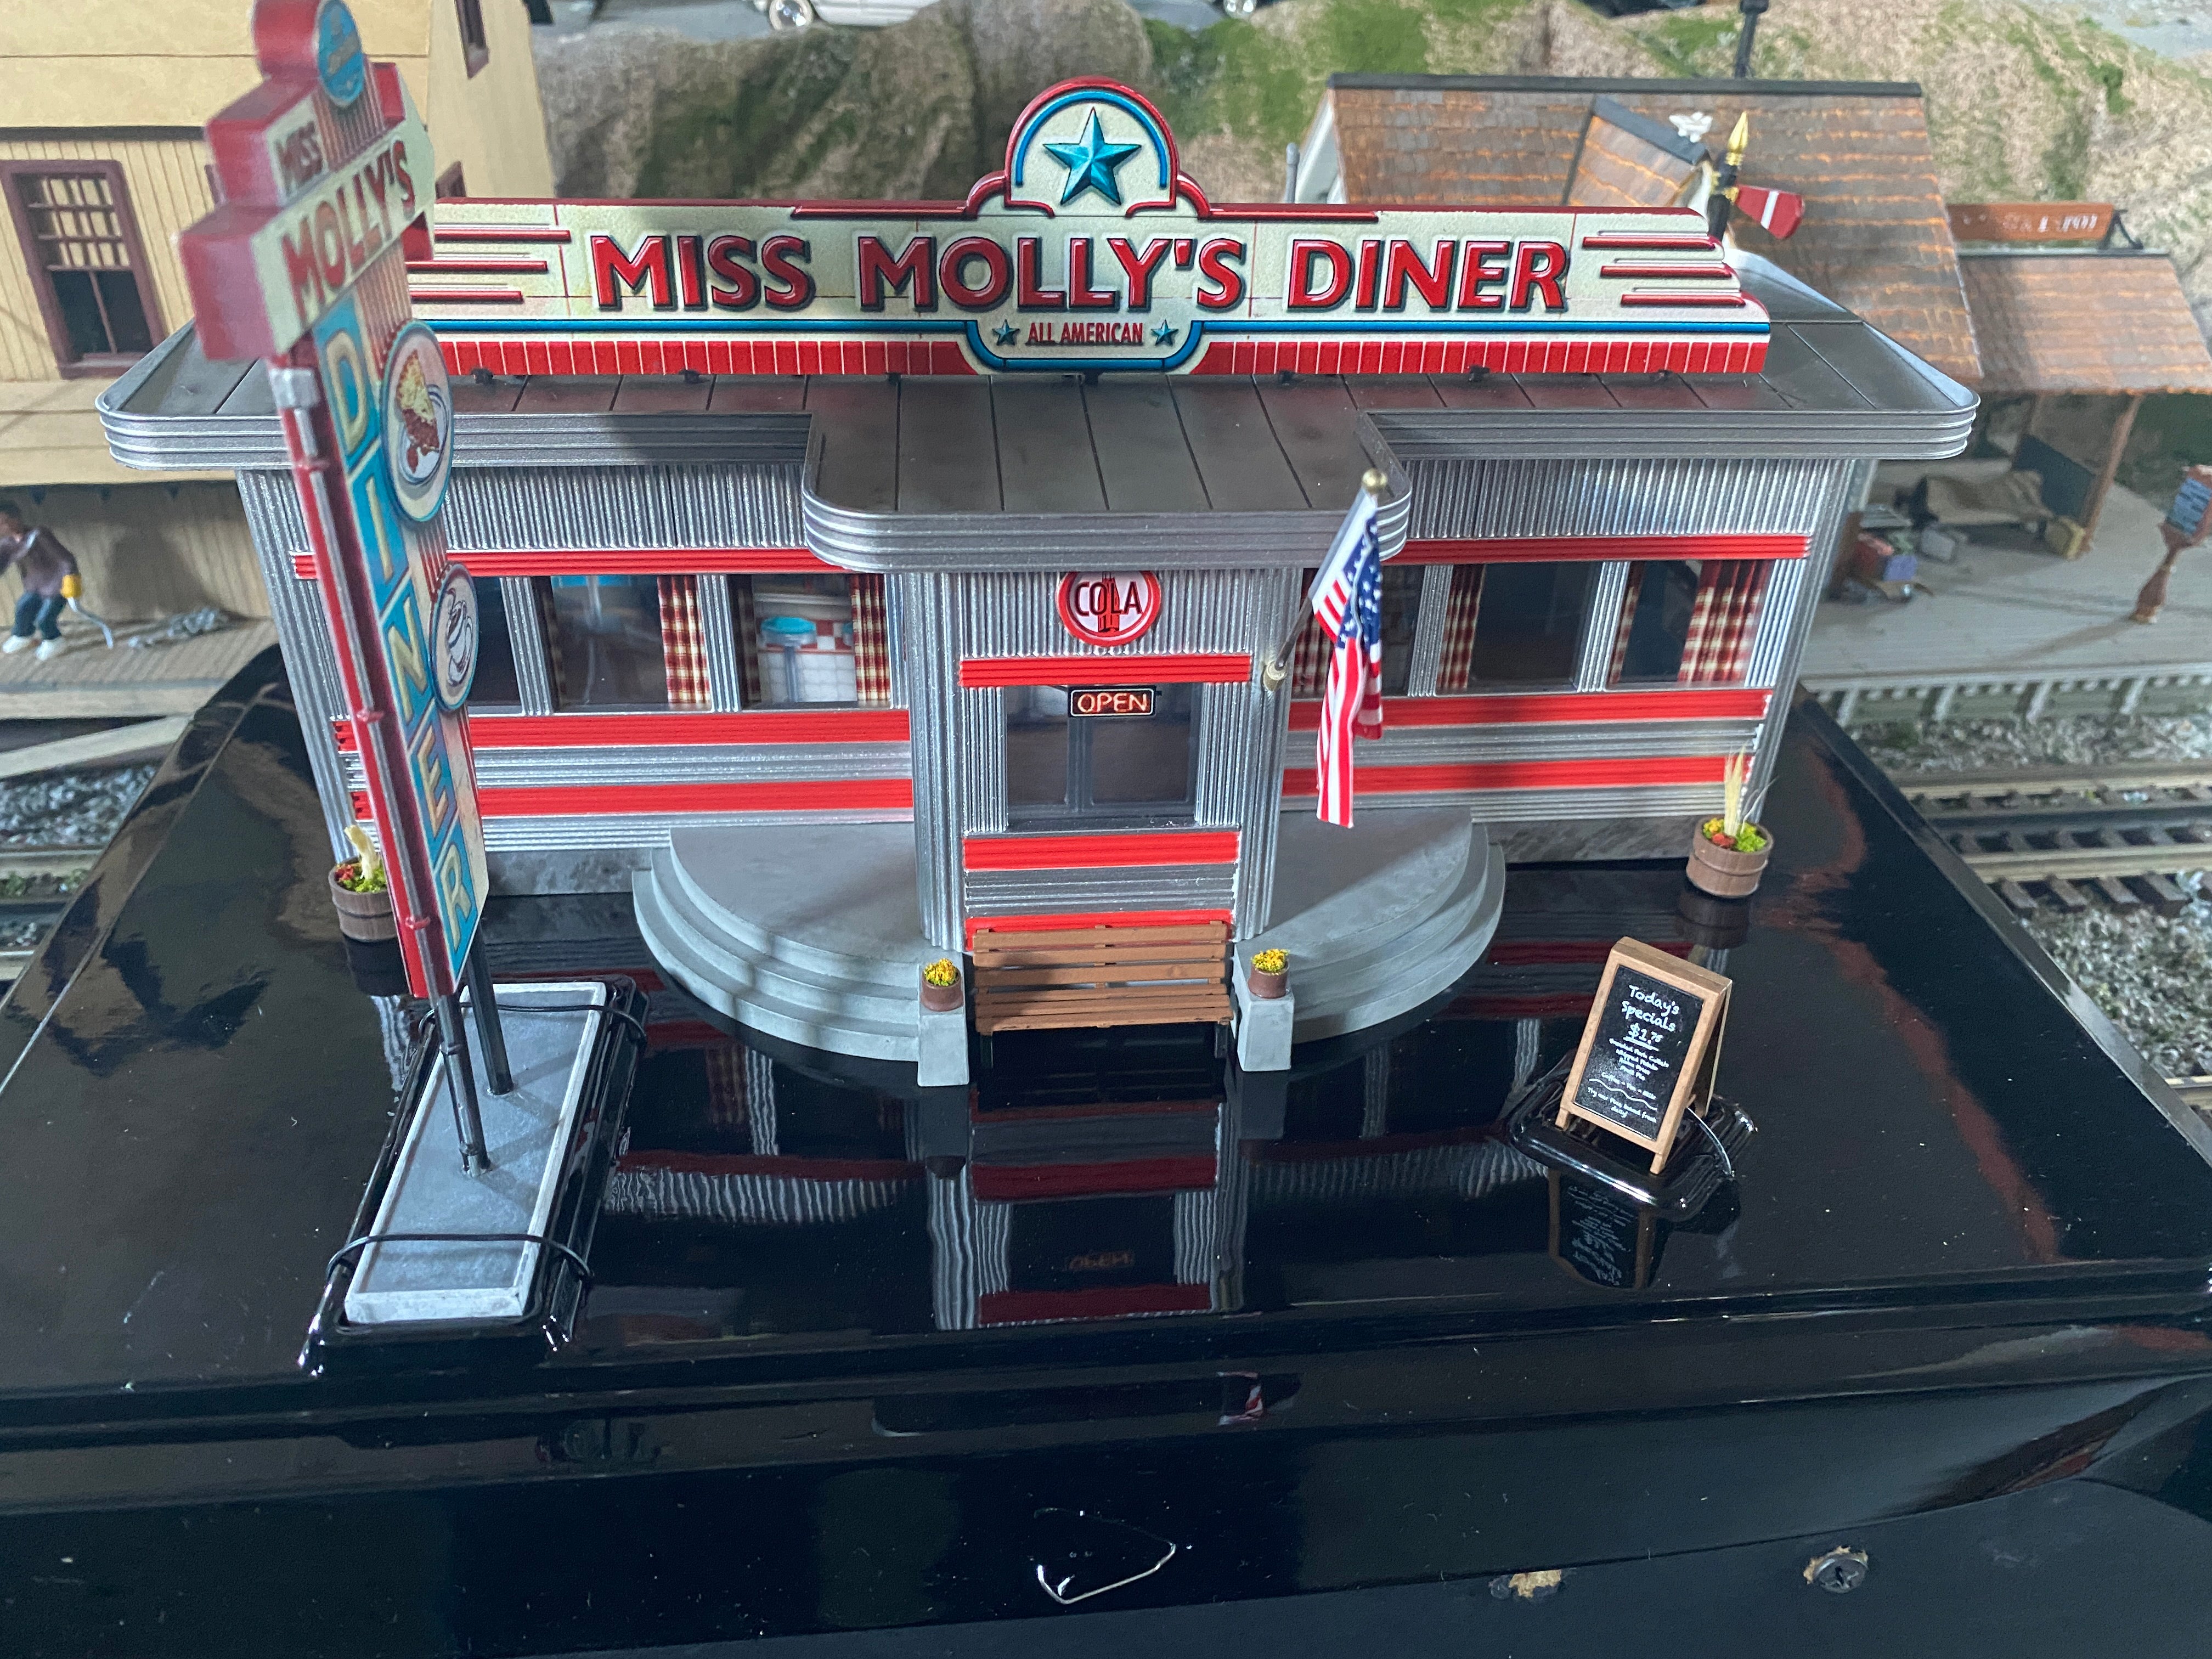 Woodland Scenics BR5870 - Miss Molly’s Diner